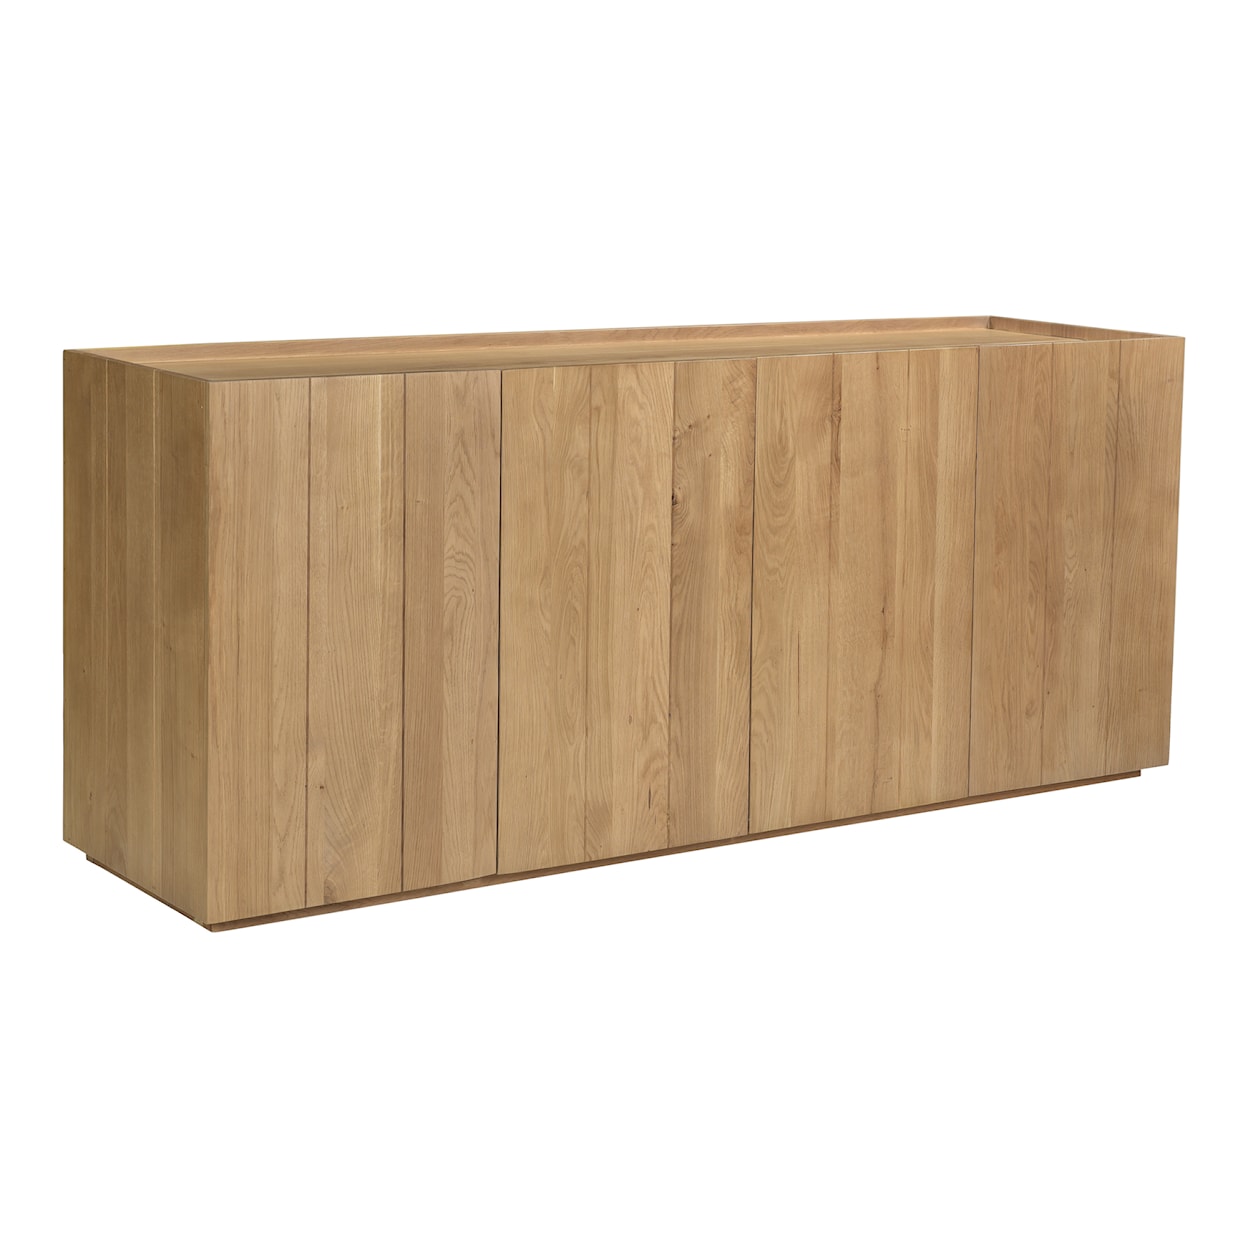 Moe's Home Collection Plank Plank Sideboard Natural